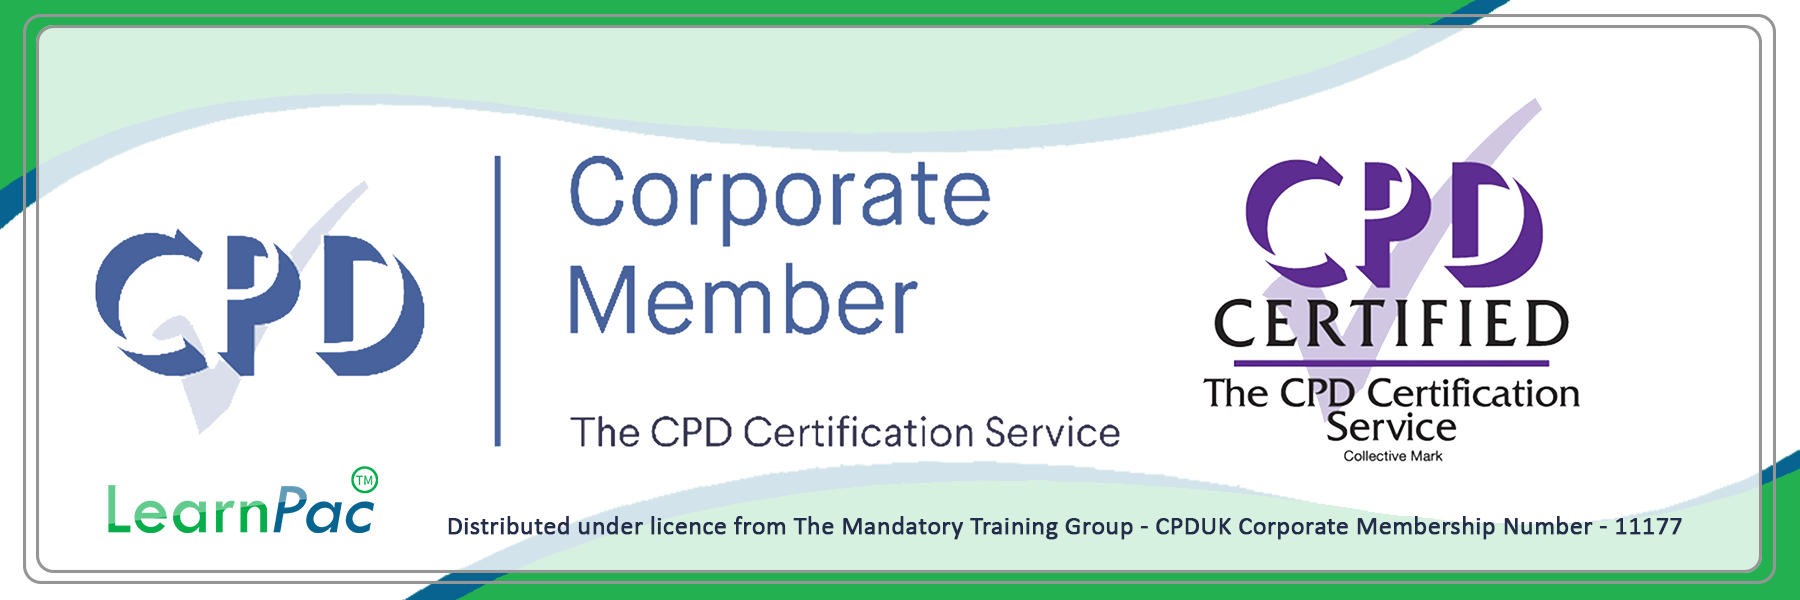 Counter Fraud Training - E-Learning Courses with Certificates - CPD Certified - LearnPac Systems UK -